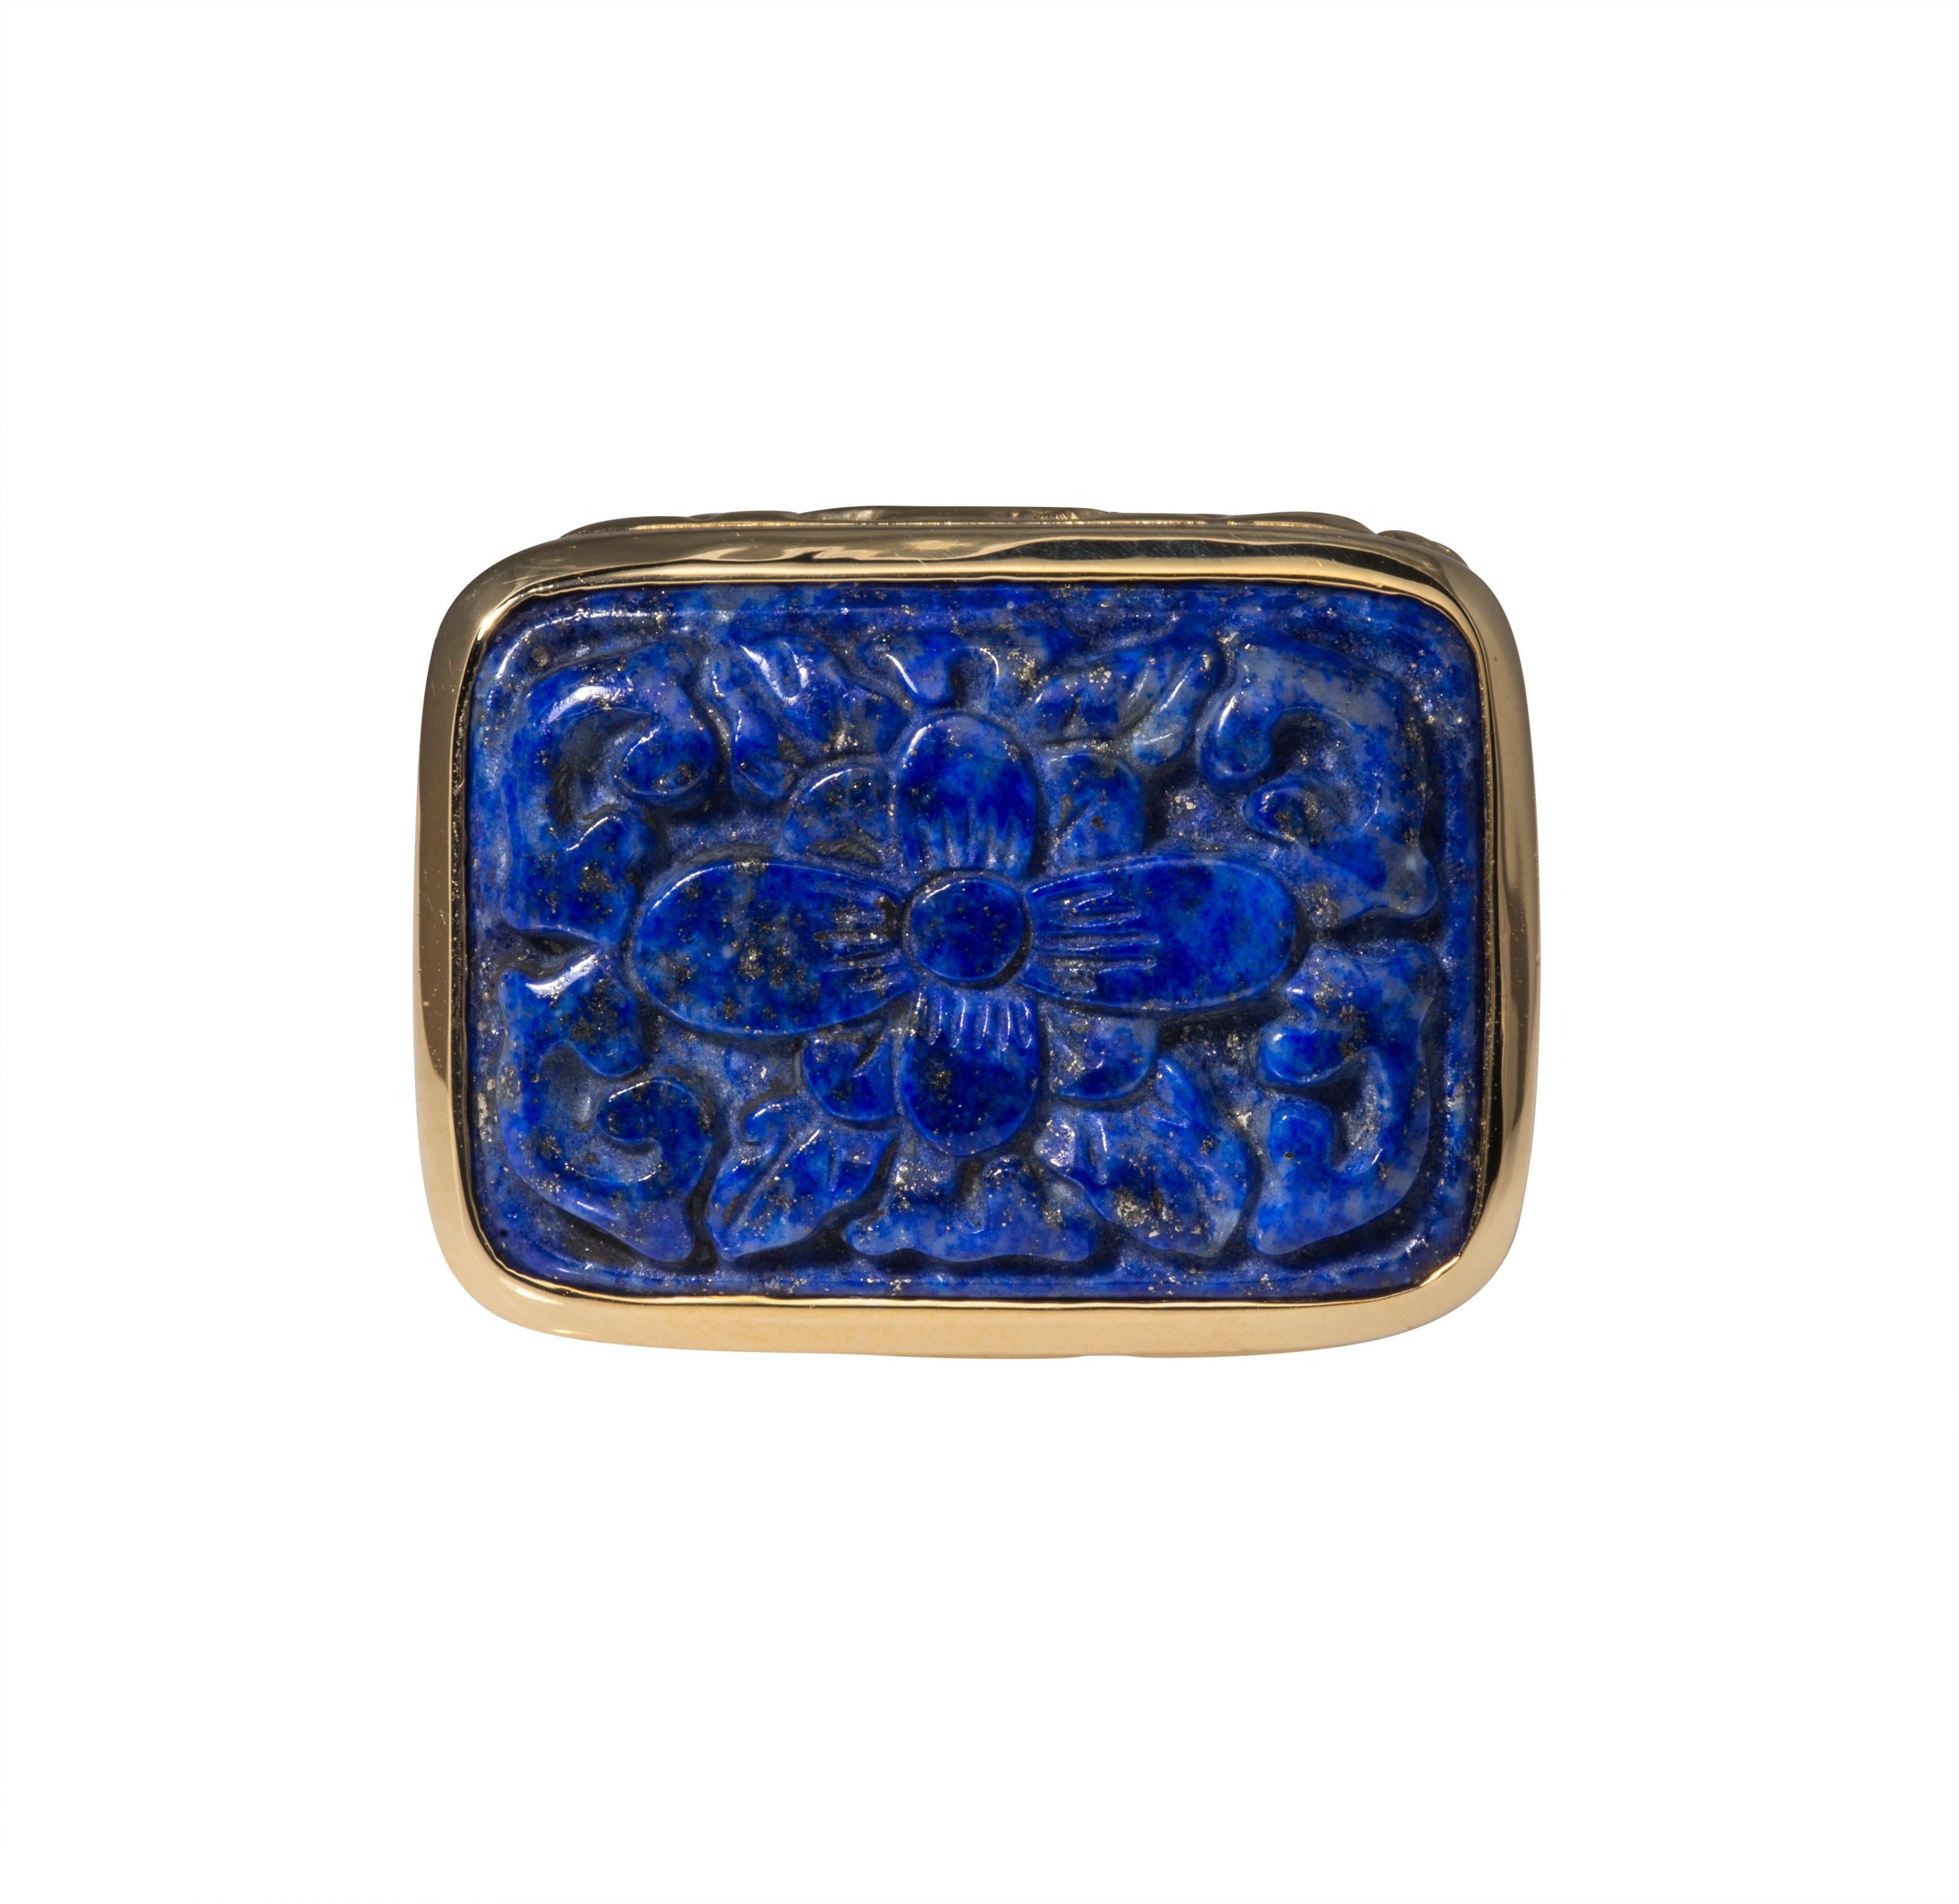 Dudley VanDyke's Acanthus Fob is featured in 14K Yellow Gold with a hand carved Lapis Lazuli floral stone. The Acanthus Fob is also available by custom order in Sterling Silver as well as in alternate stones: Tiger Eye and Green Aventurine. This